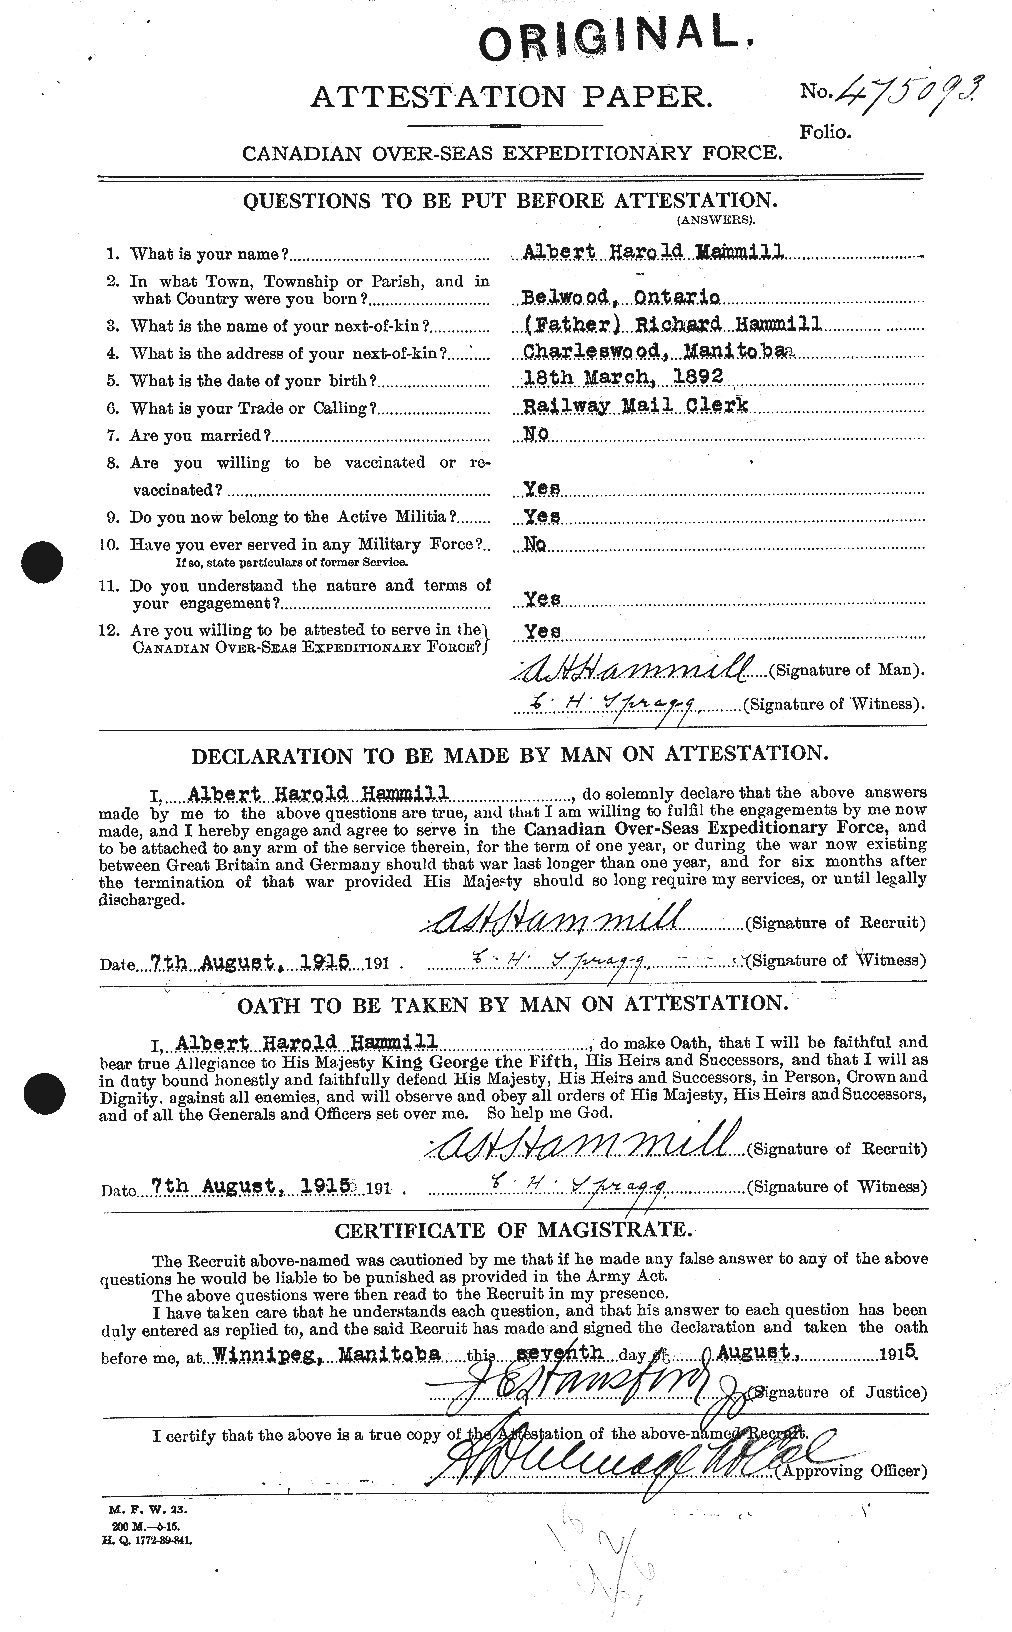 Personnel Records of the First World War - CEF 376297a